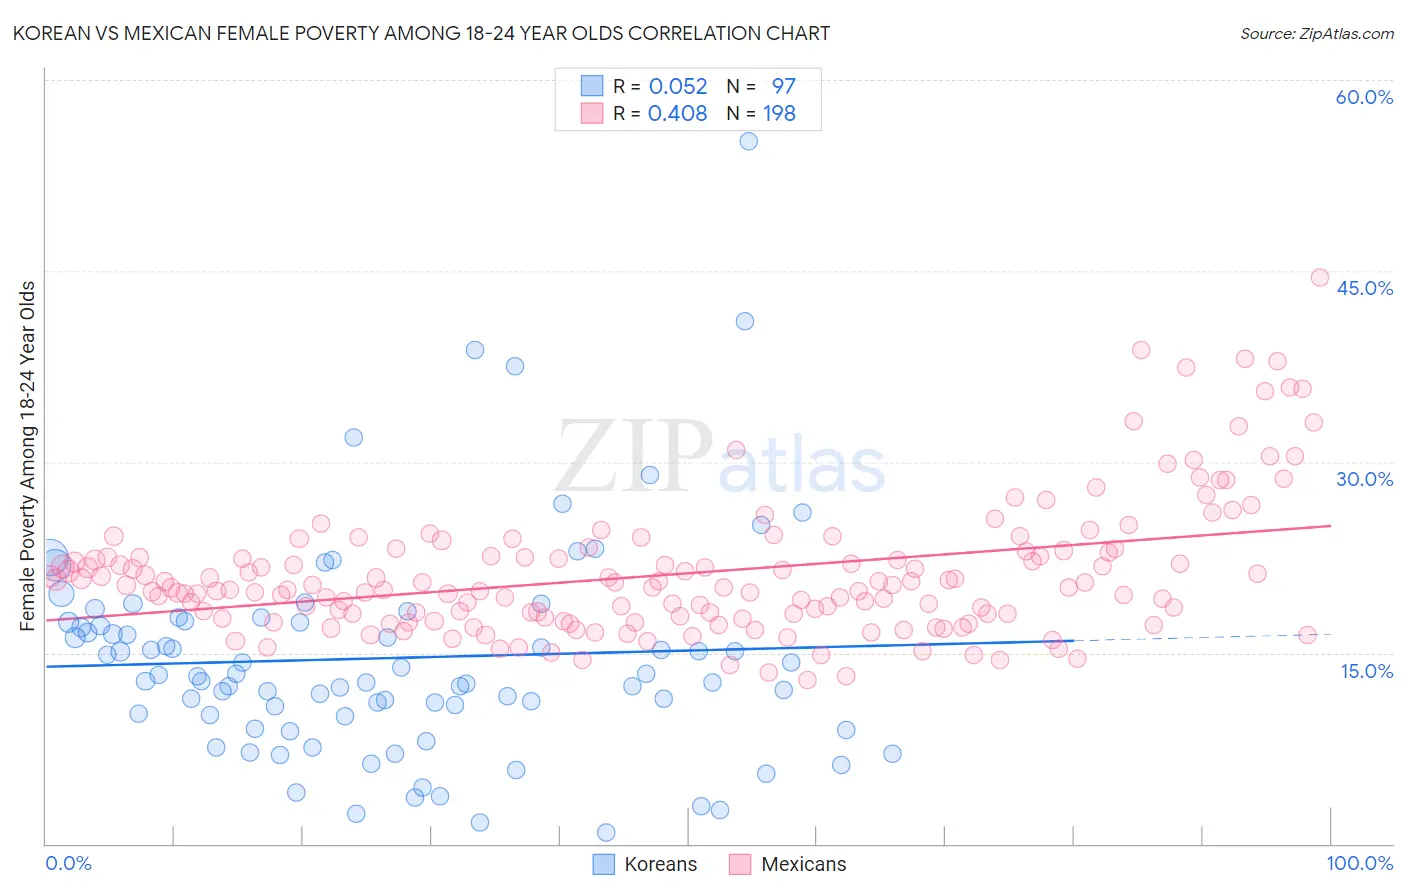 Korean vs Mexican Female Poverty Among 18-24 Year Olds